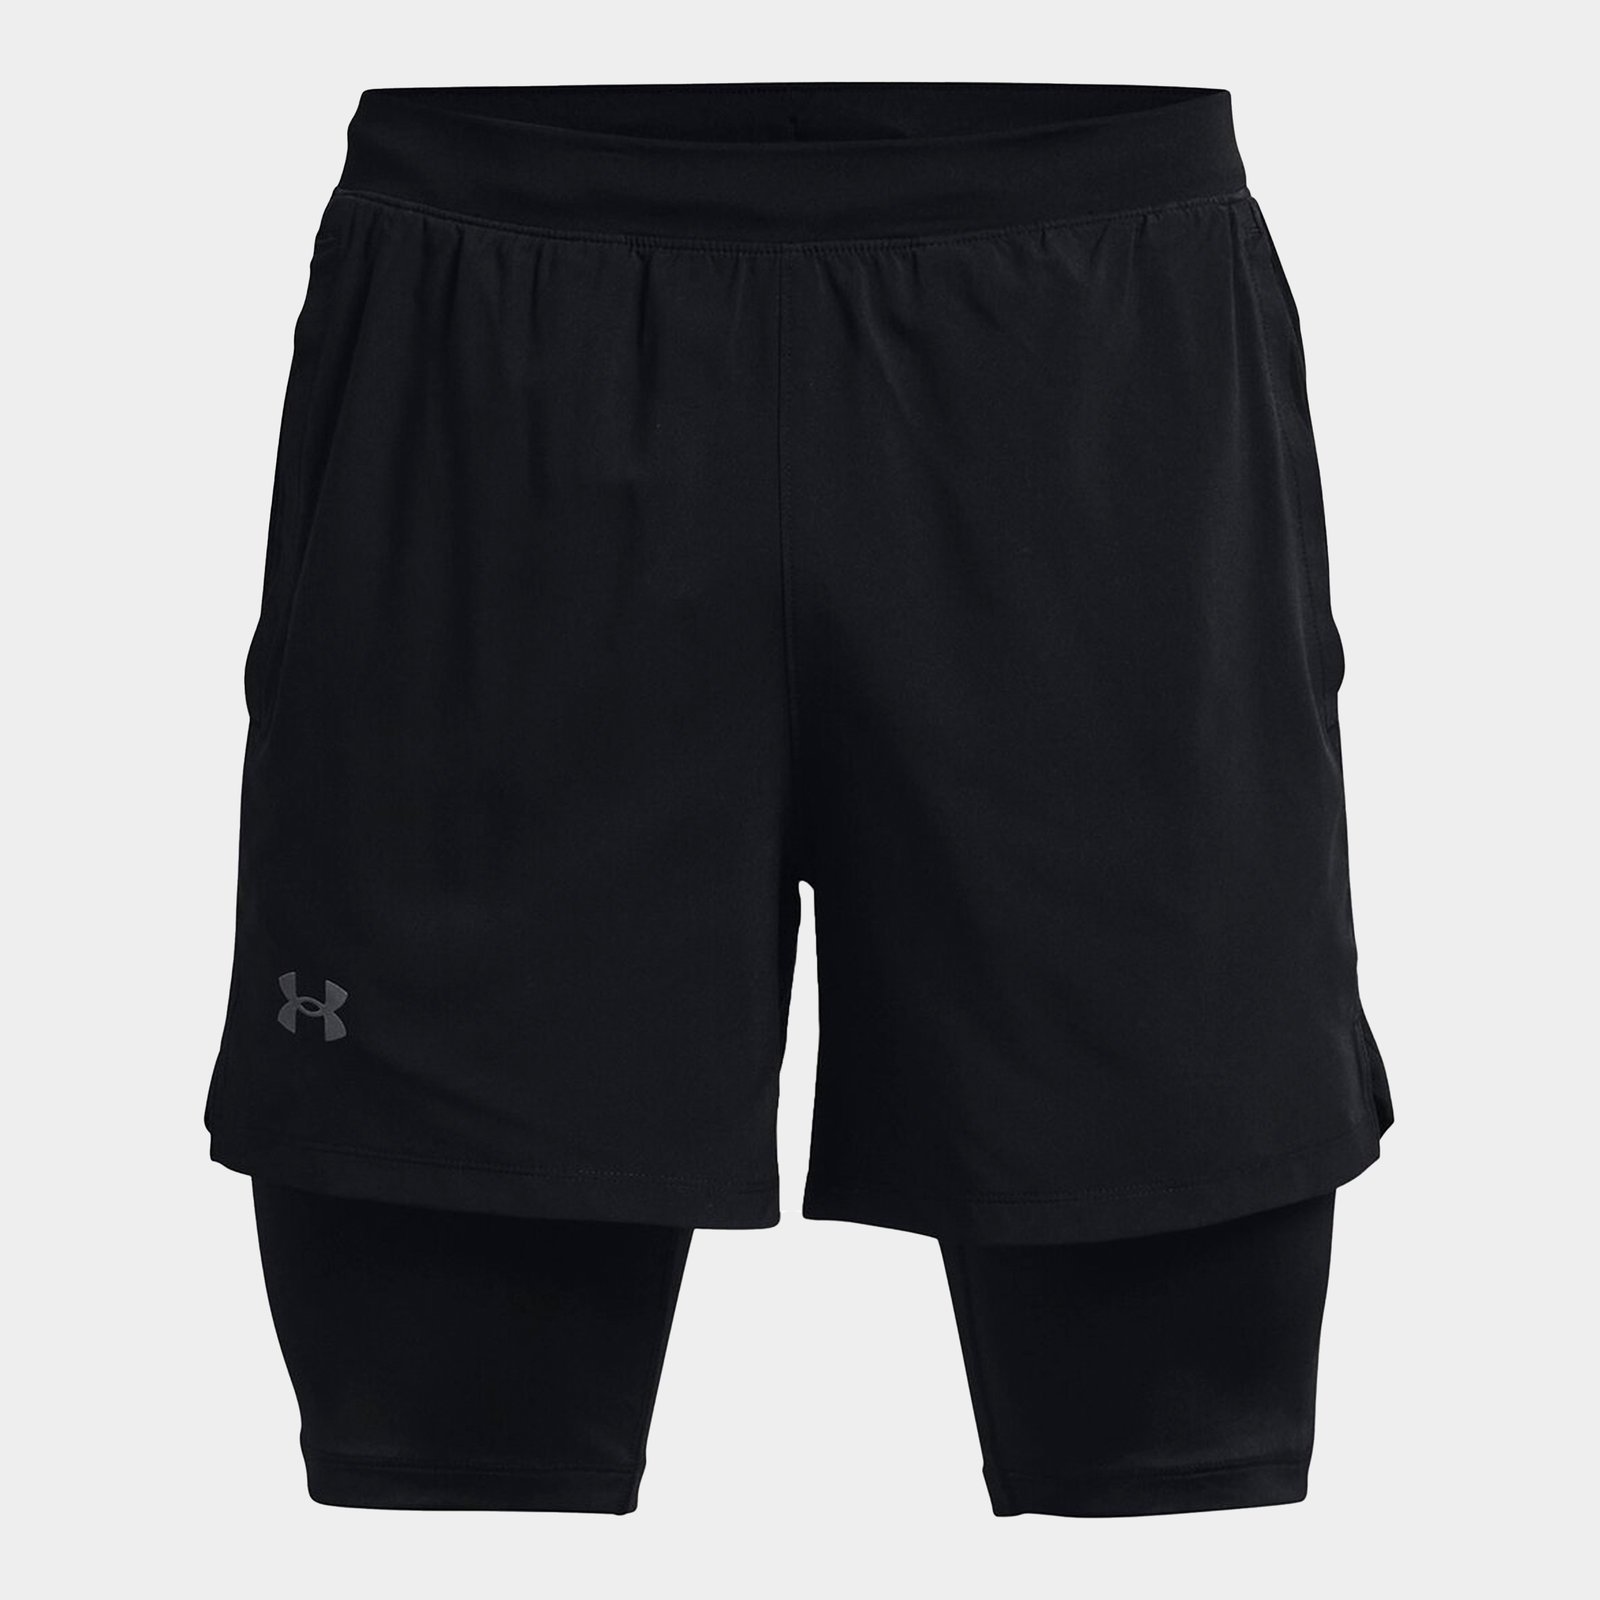 shorts Under Armour Challenger Knit - 012/Pitch Gray/Black - men´s 